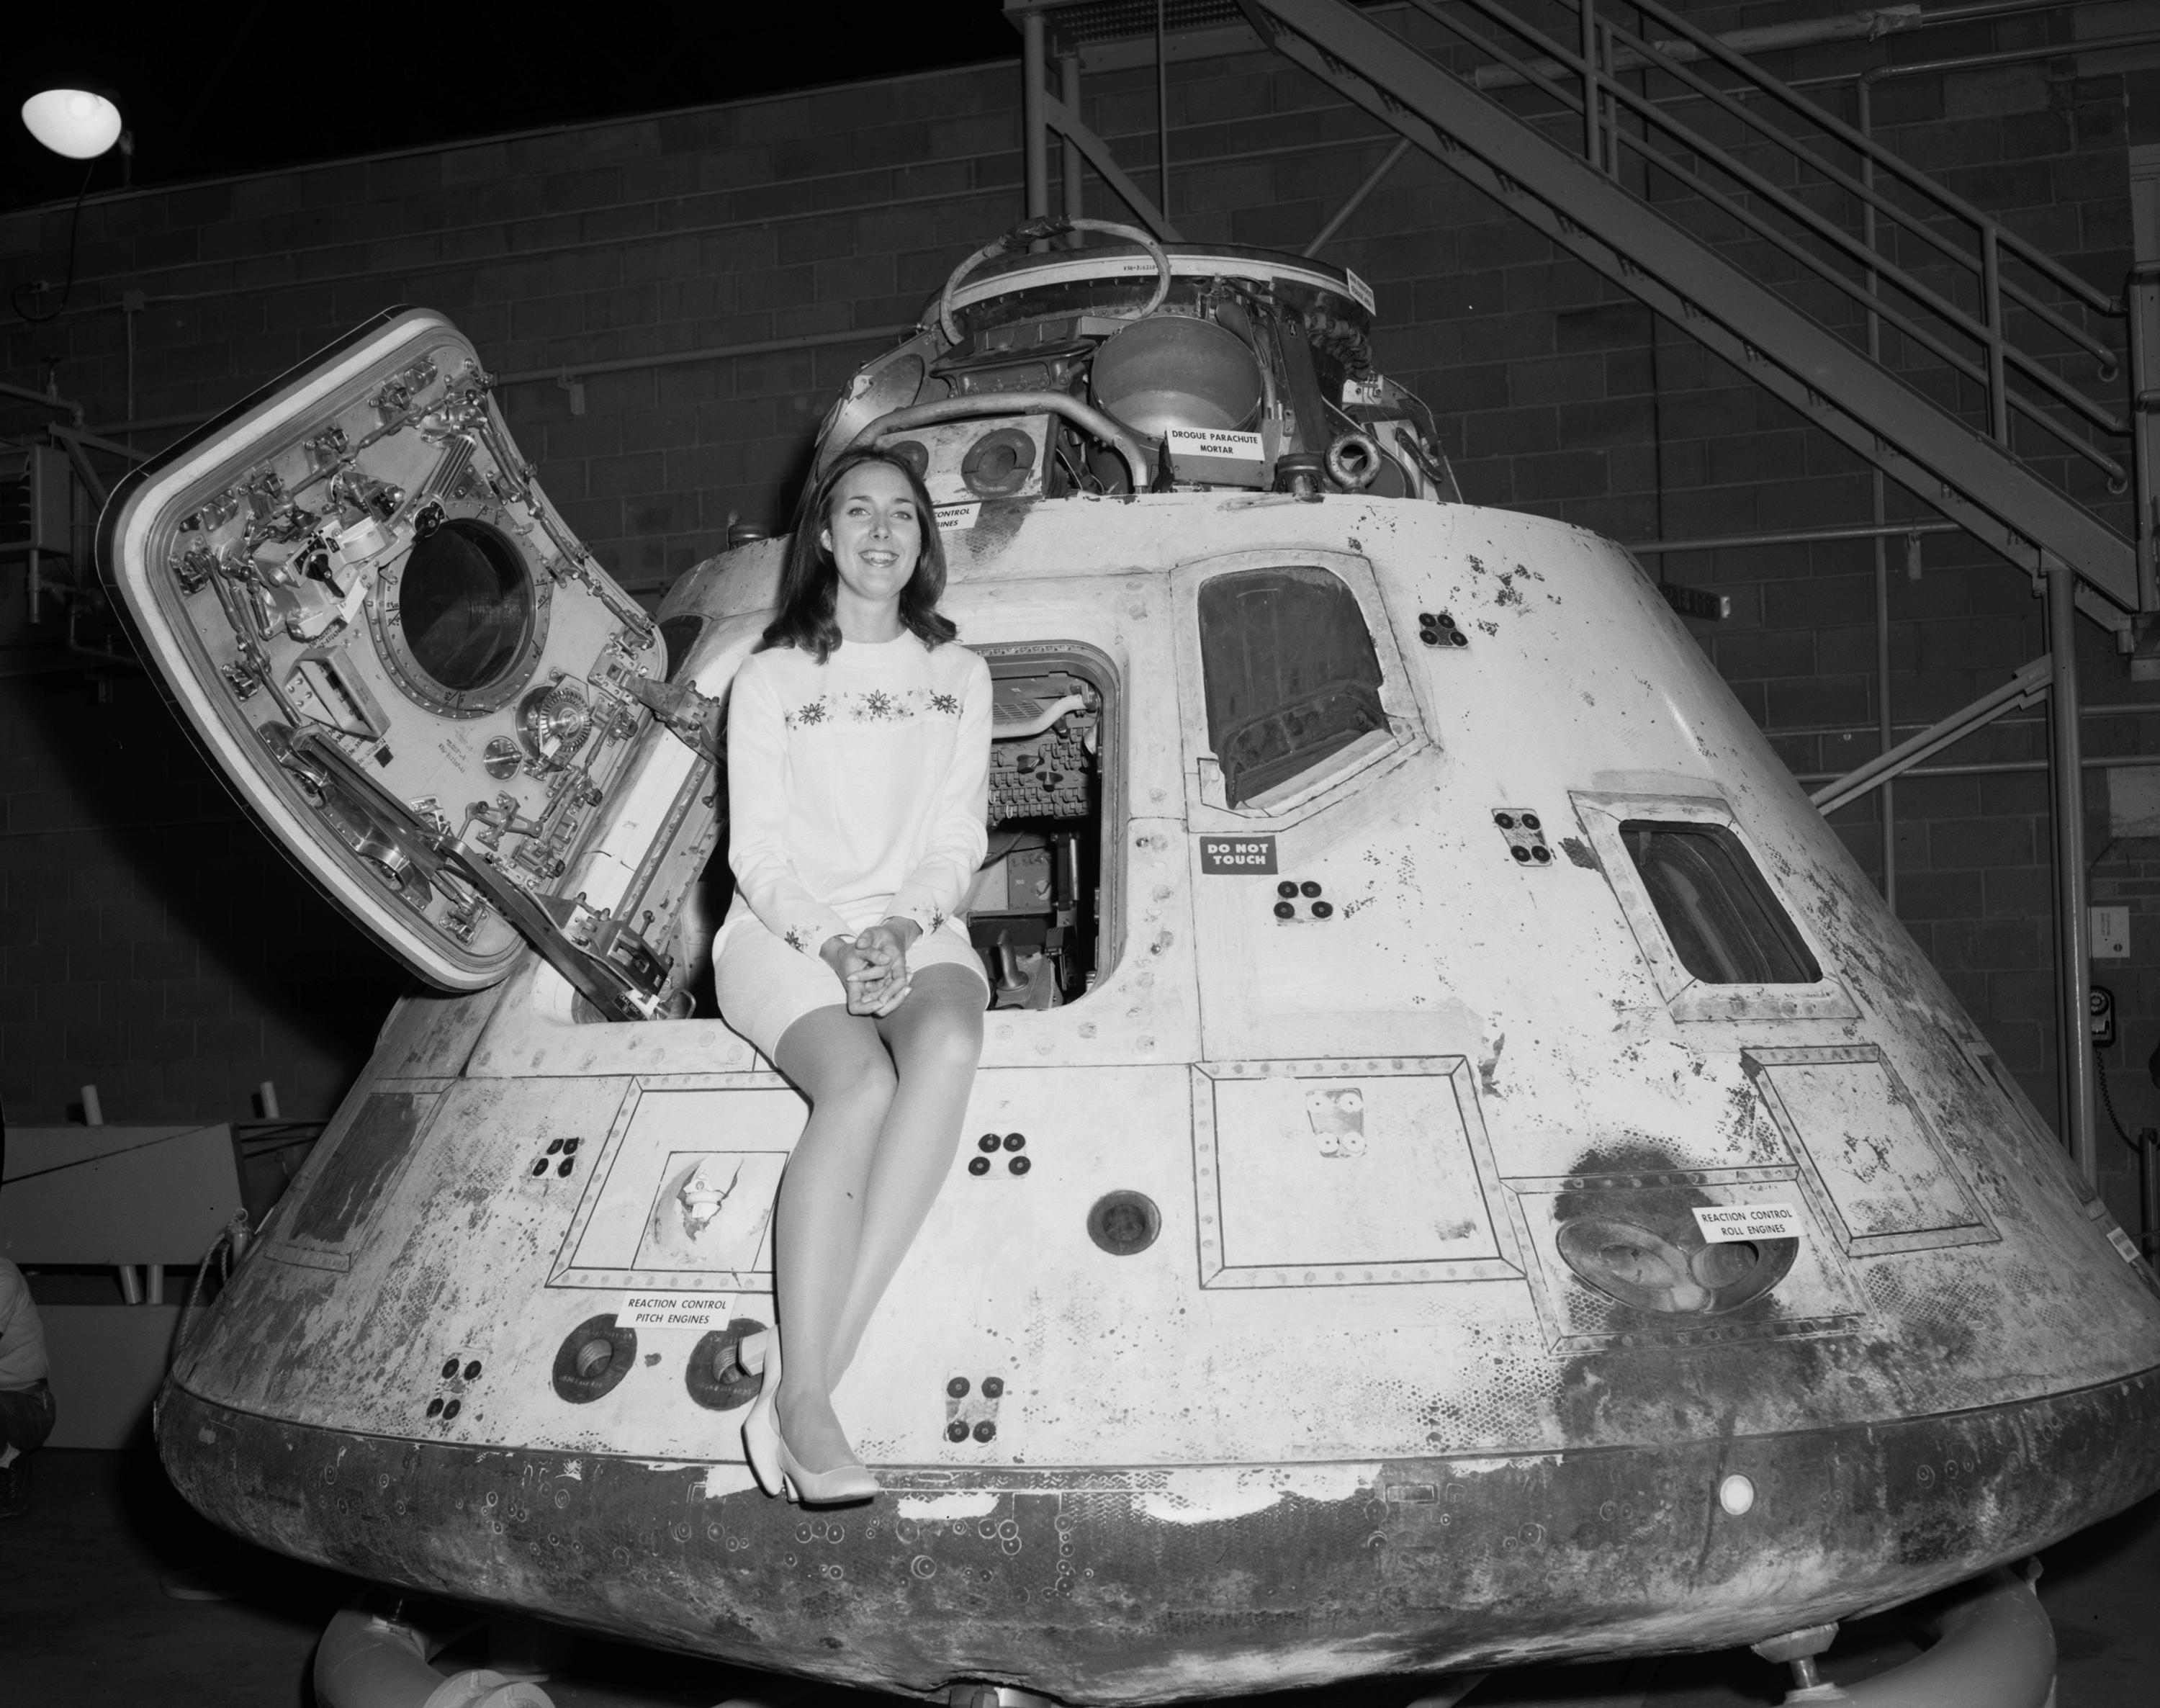 Miss NASA 1971 posing on the Apollo 8 capsule in Houston, Texas, US in 1971. Apparently NASA held a beauty pageant for many years from the 1950s until the late 1970s to try and get more people interested in the program. They originally had other titles such as Miss Guided Missile and Miss Jet Propulsion before becoming just Miss NASA in the late 1960s.